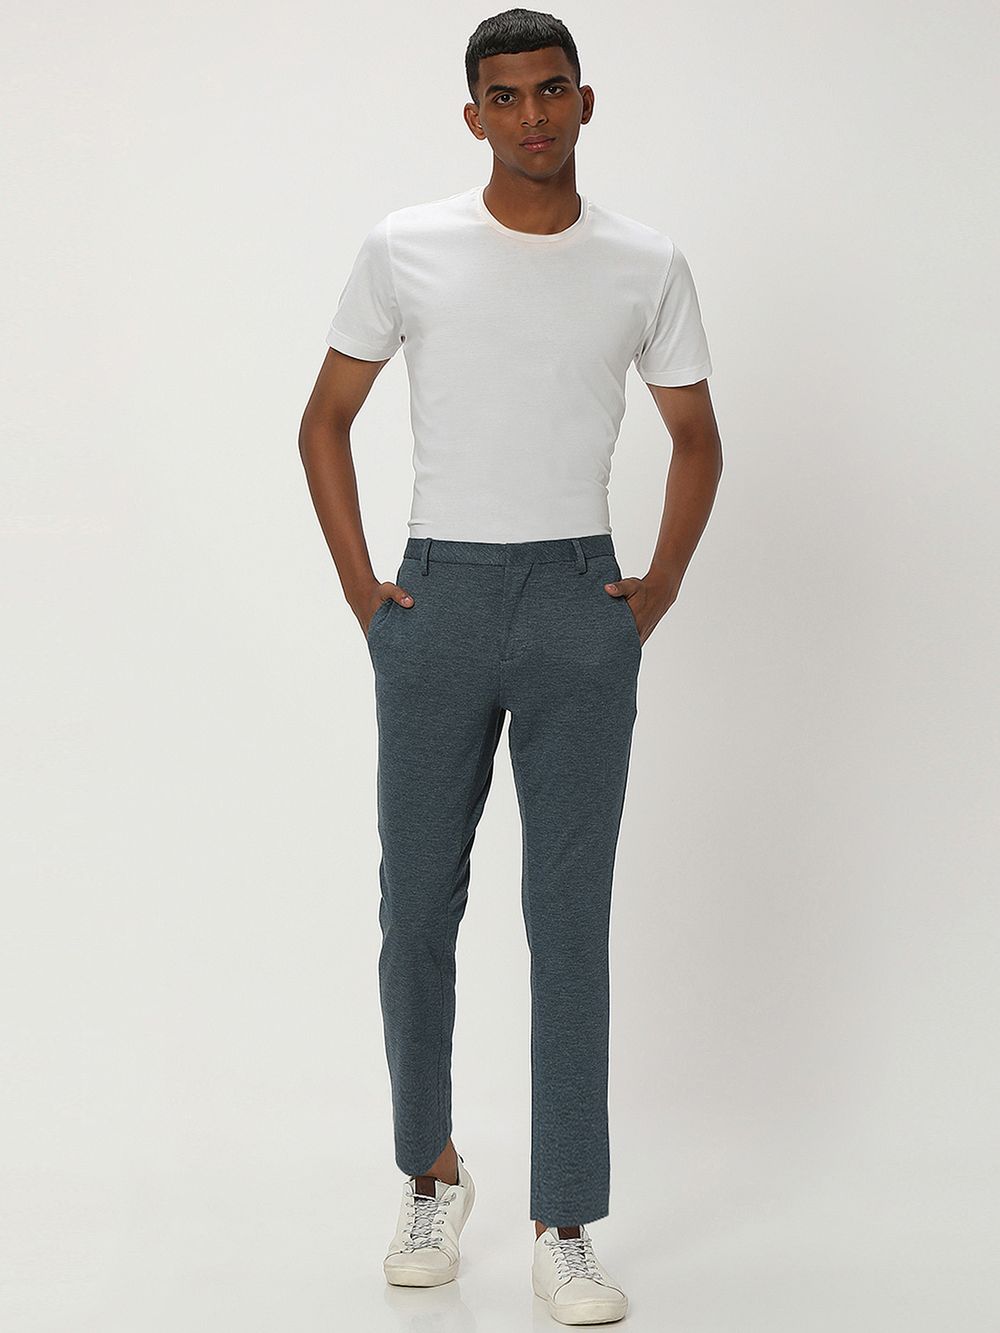 Teal Ankle Length Stretch Chinos